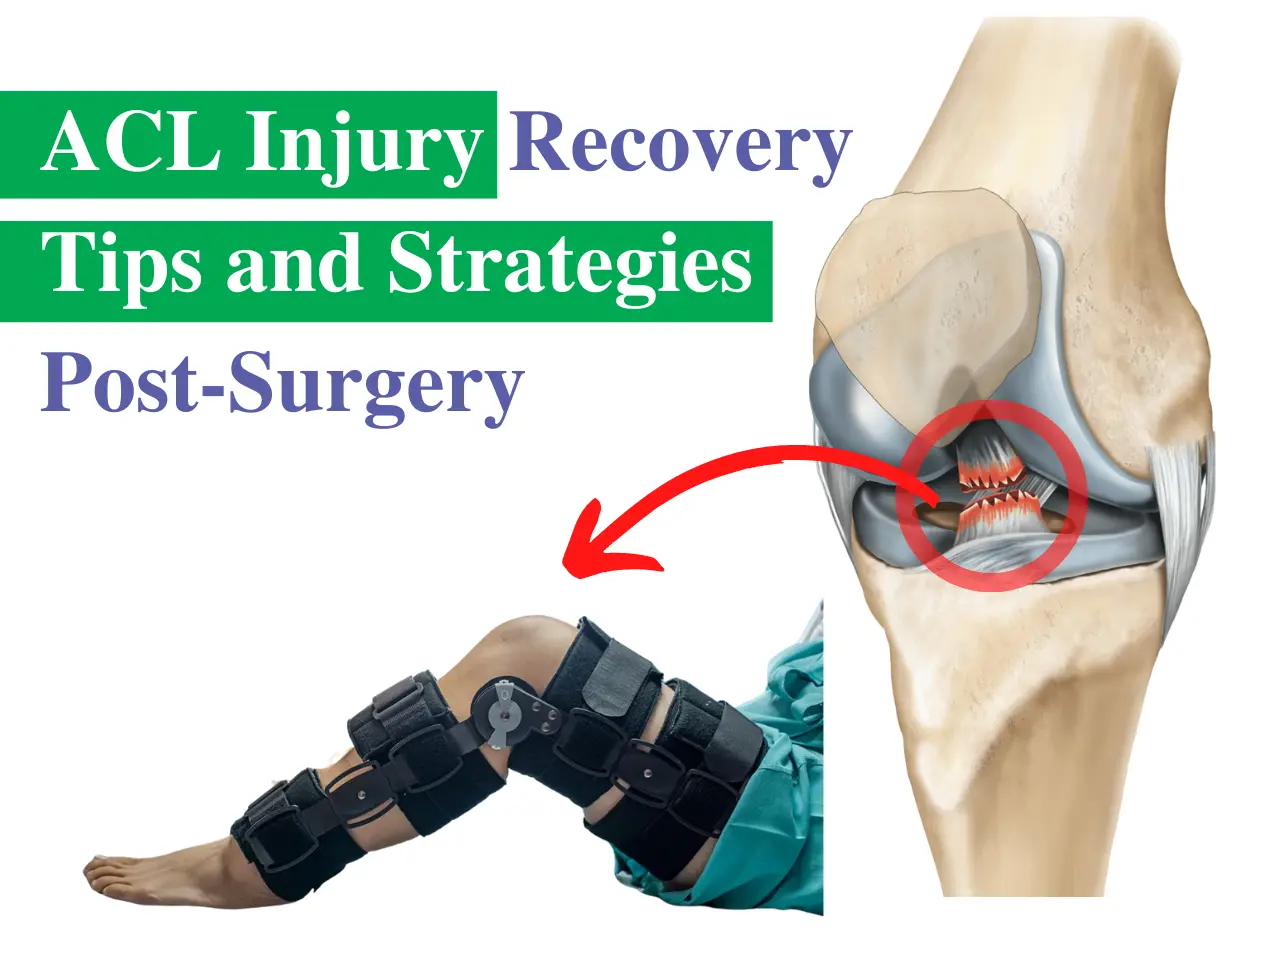 ACL Injury Recovery tips